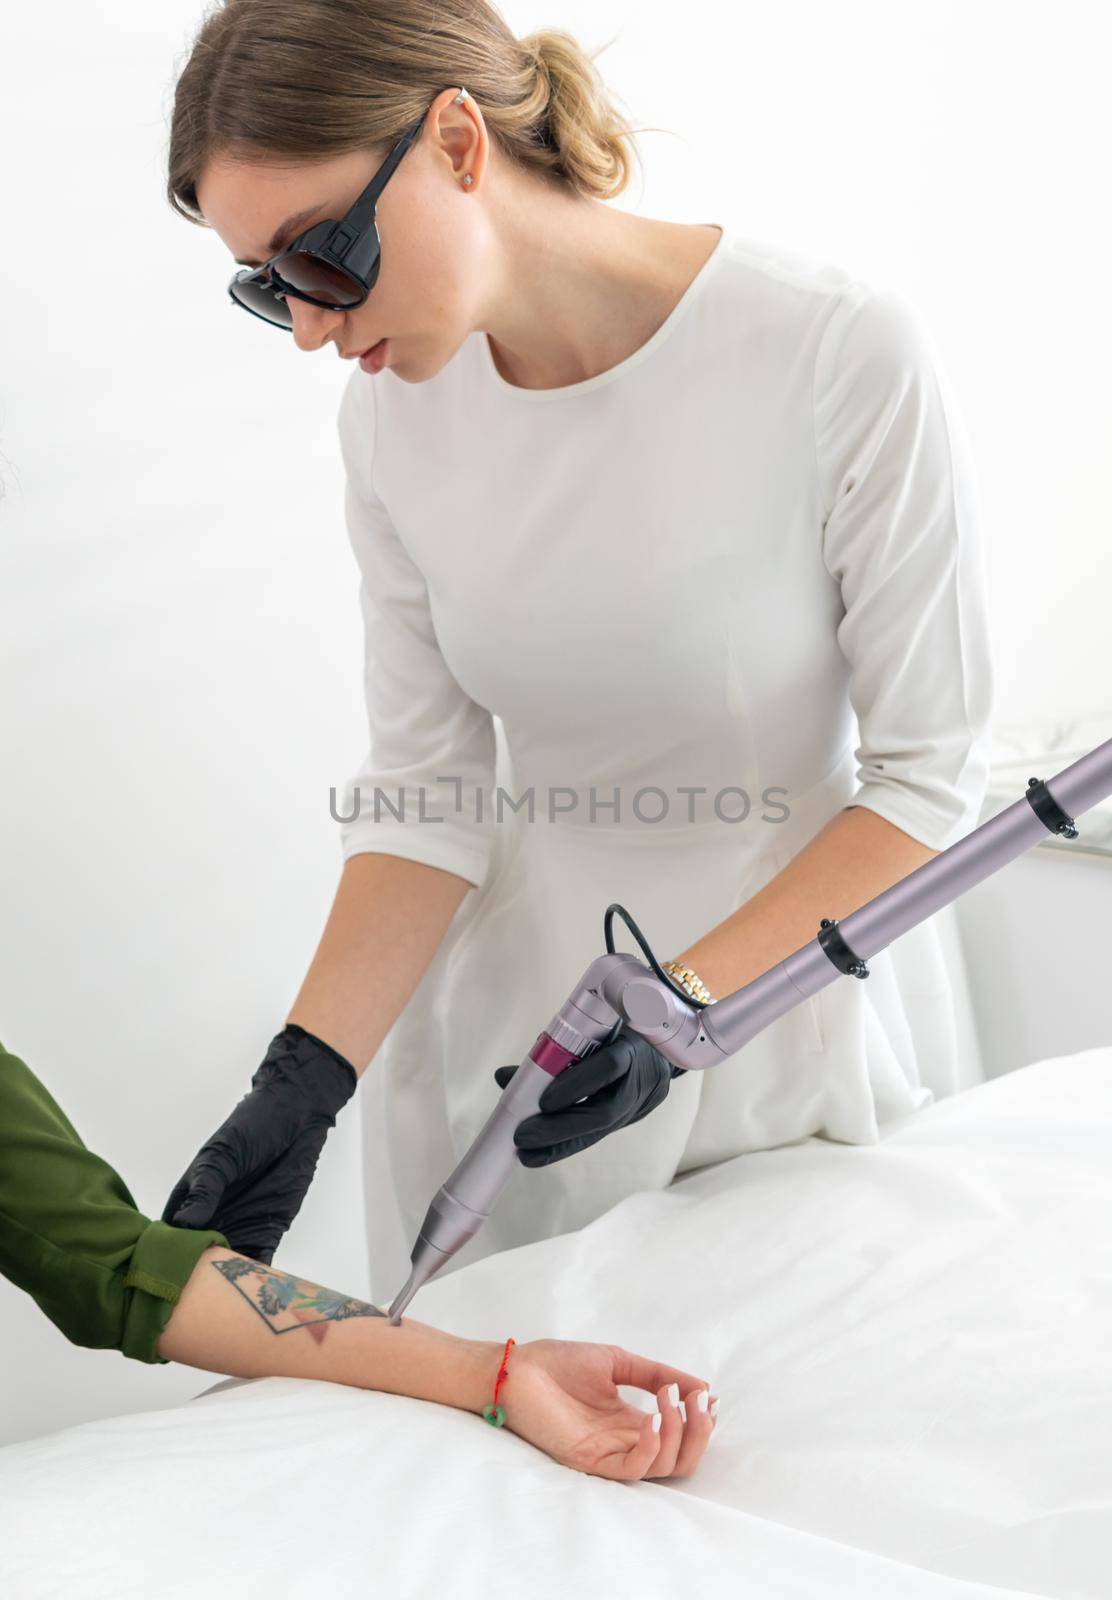 Cosmetologist removing tattoo with laser device female hand. Concept of erasing tattoos as expensive procedure in cosmetology clinic